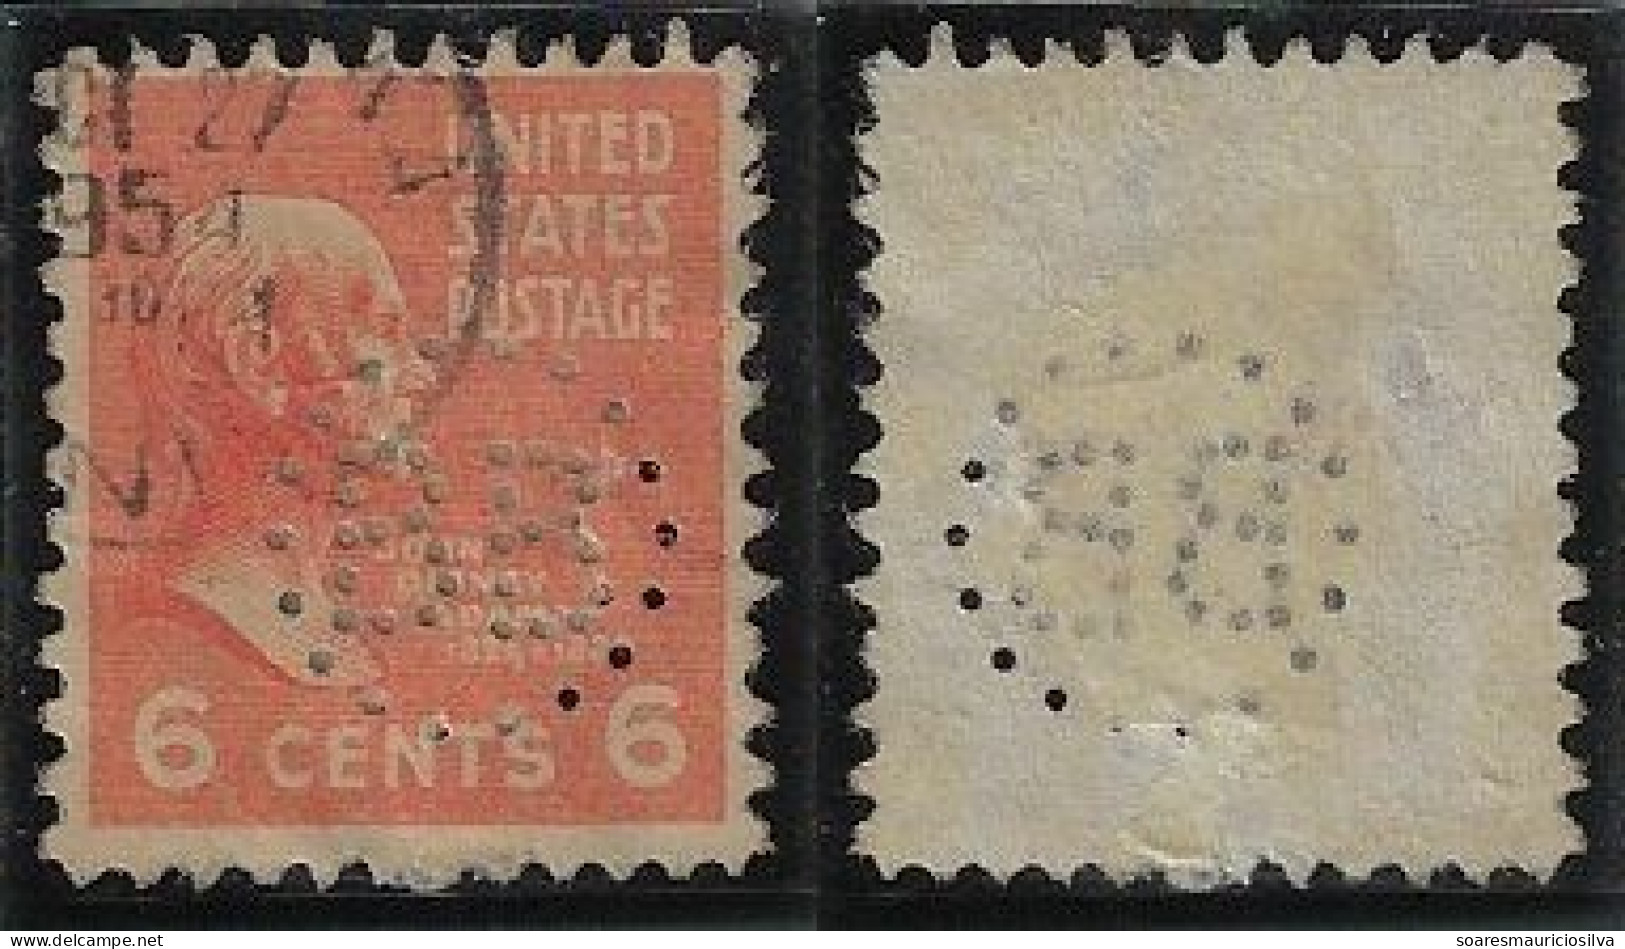 USA United States 1902/1954 Stamp With Perfin BB(Circle) By United States Rubber Company From Mishawaka Lochung Perfore - Perfin